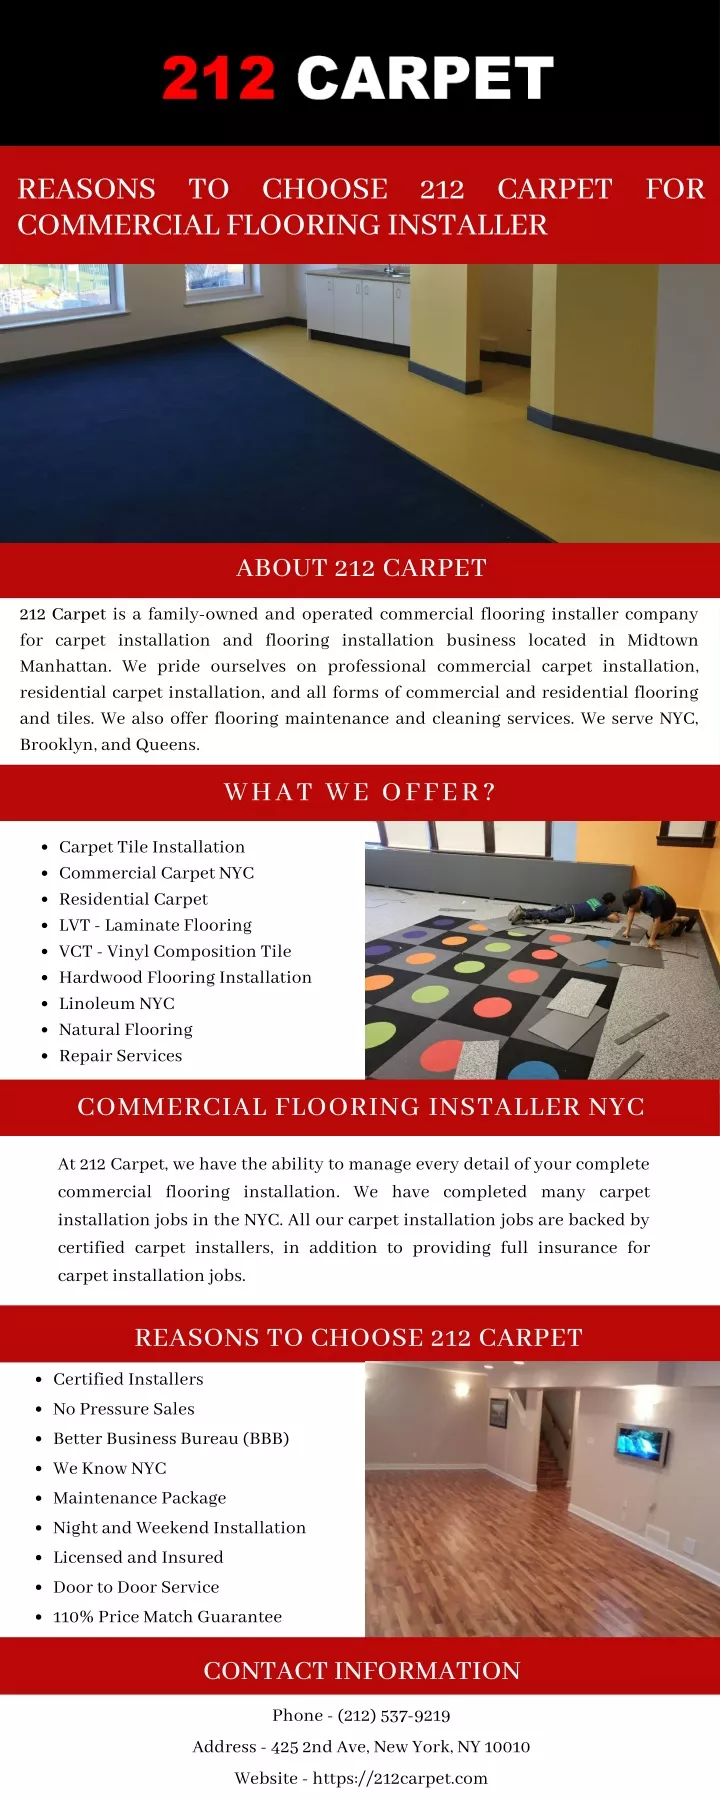 reasons to choose 212 carpet for commercial